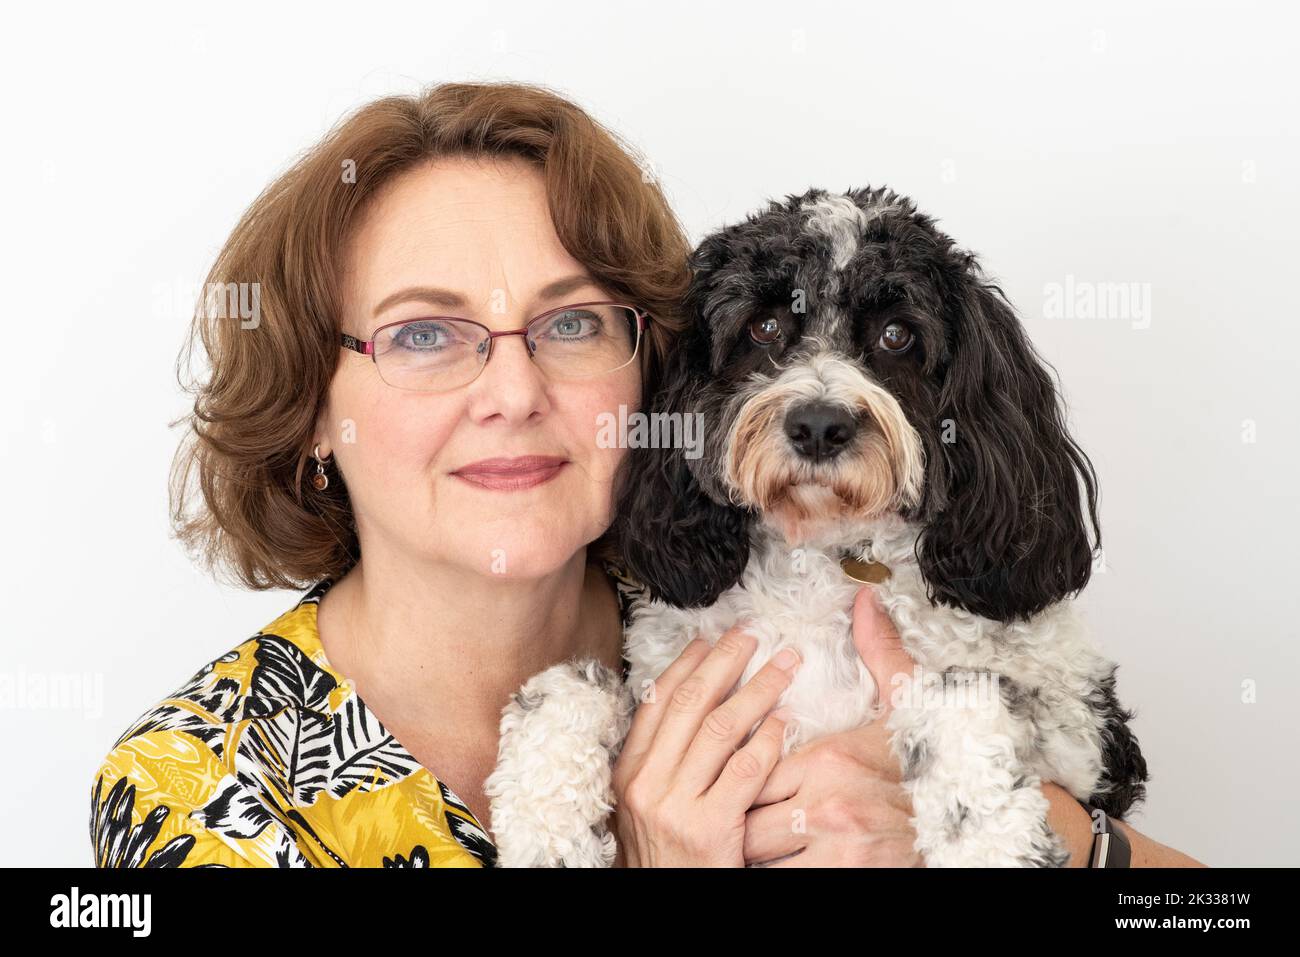 Portrait of attractive middle aged woman holding black and white cockapoo dog, both looking to camera, on a white background. Calmness, togetherness. Stock Photo